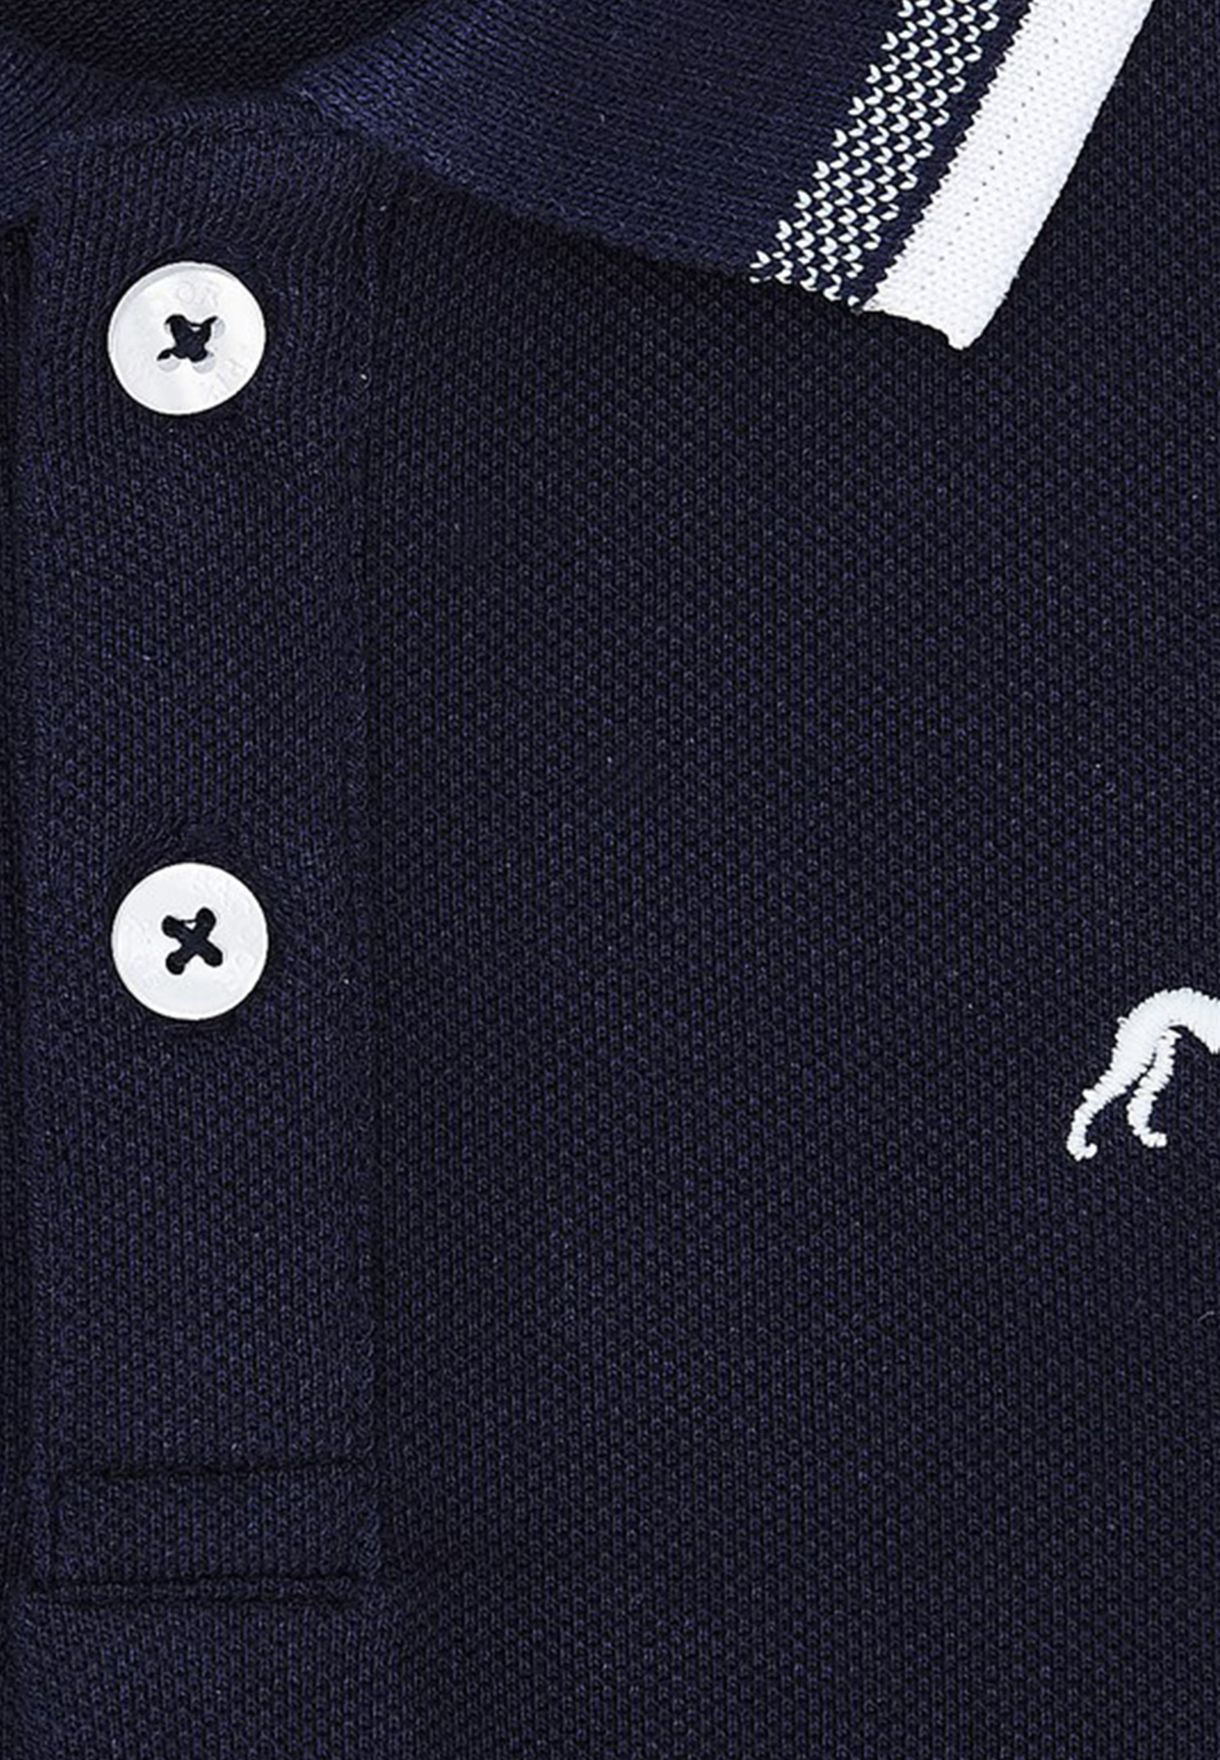 Kids Tipped Collar Polo